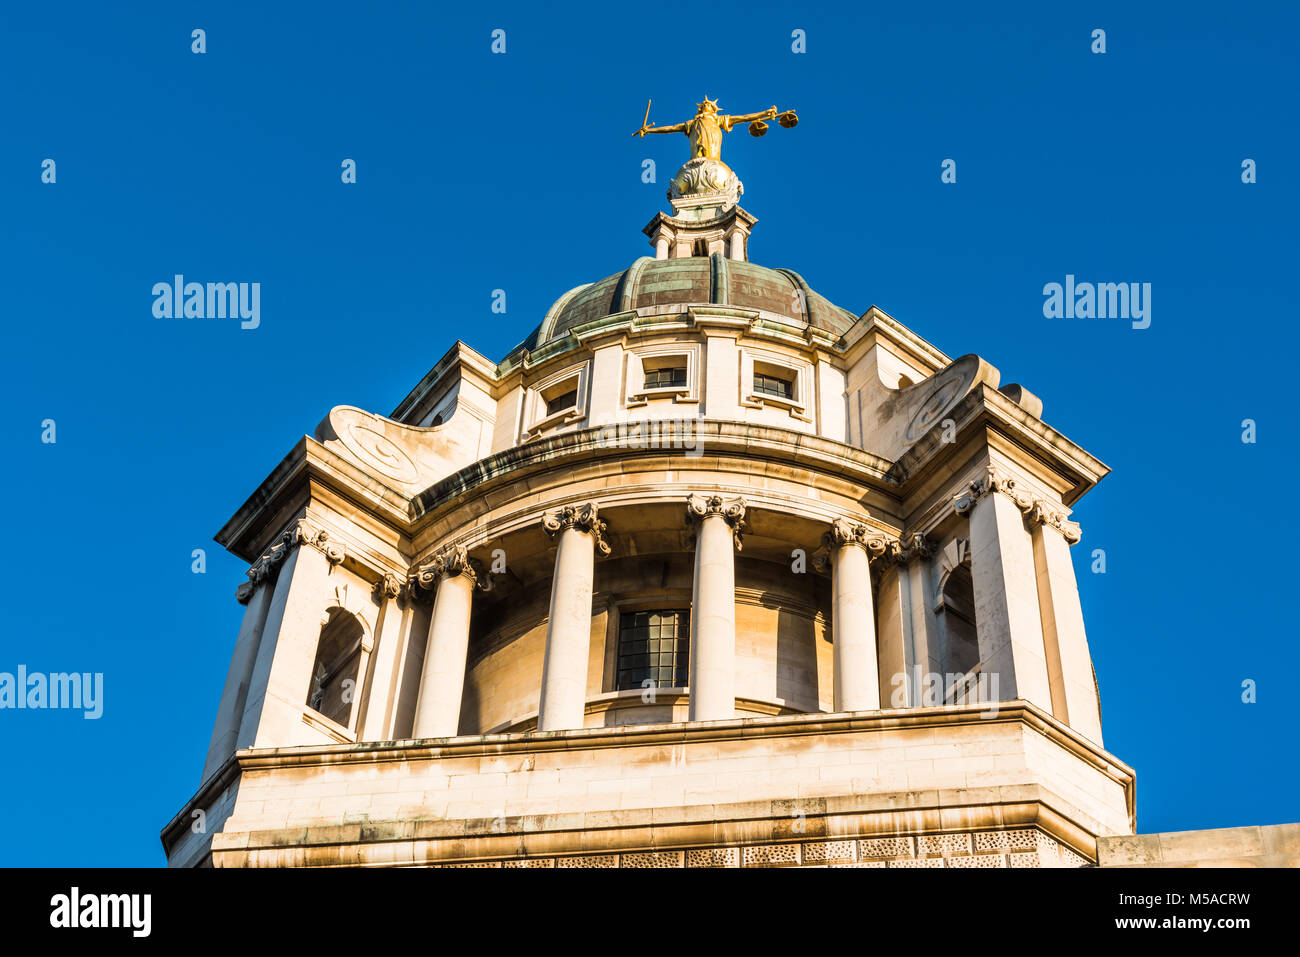 The gold leaf statue of Lady Justice on top of The Old Bailey court building, London Stock Photo